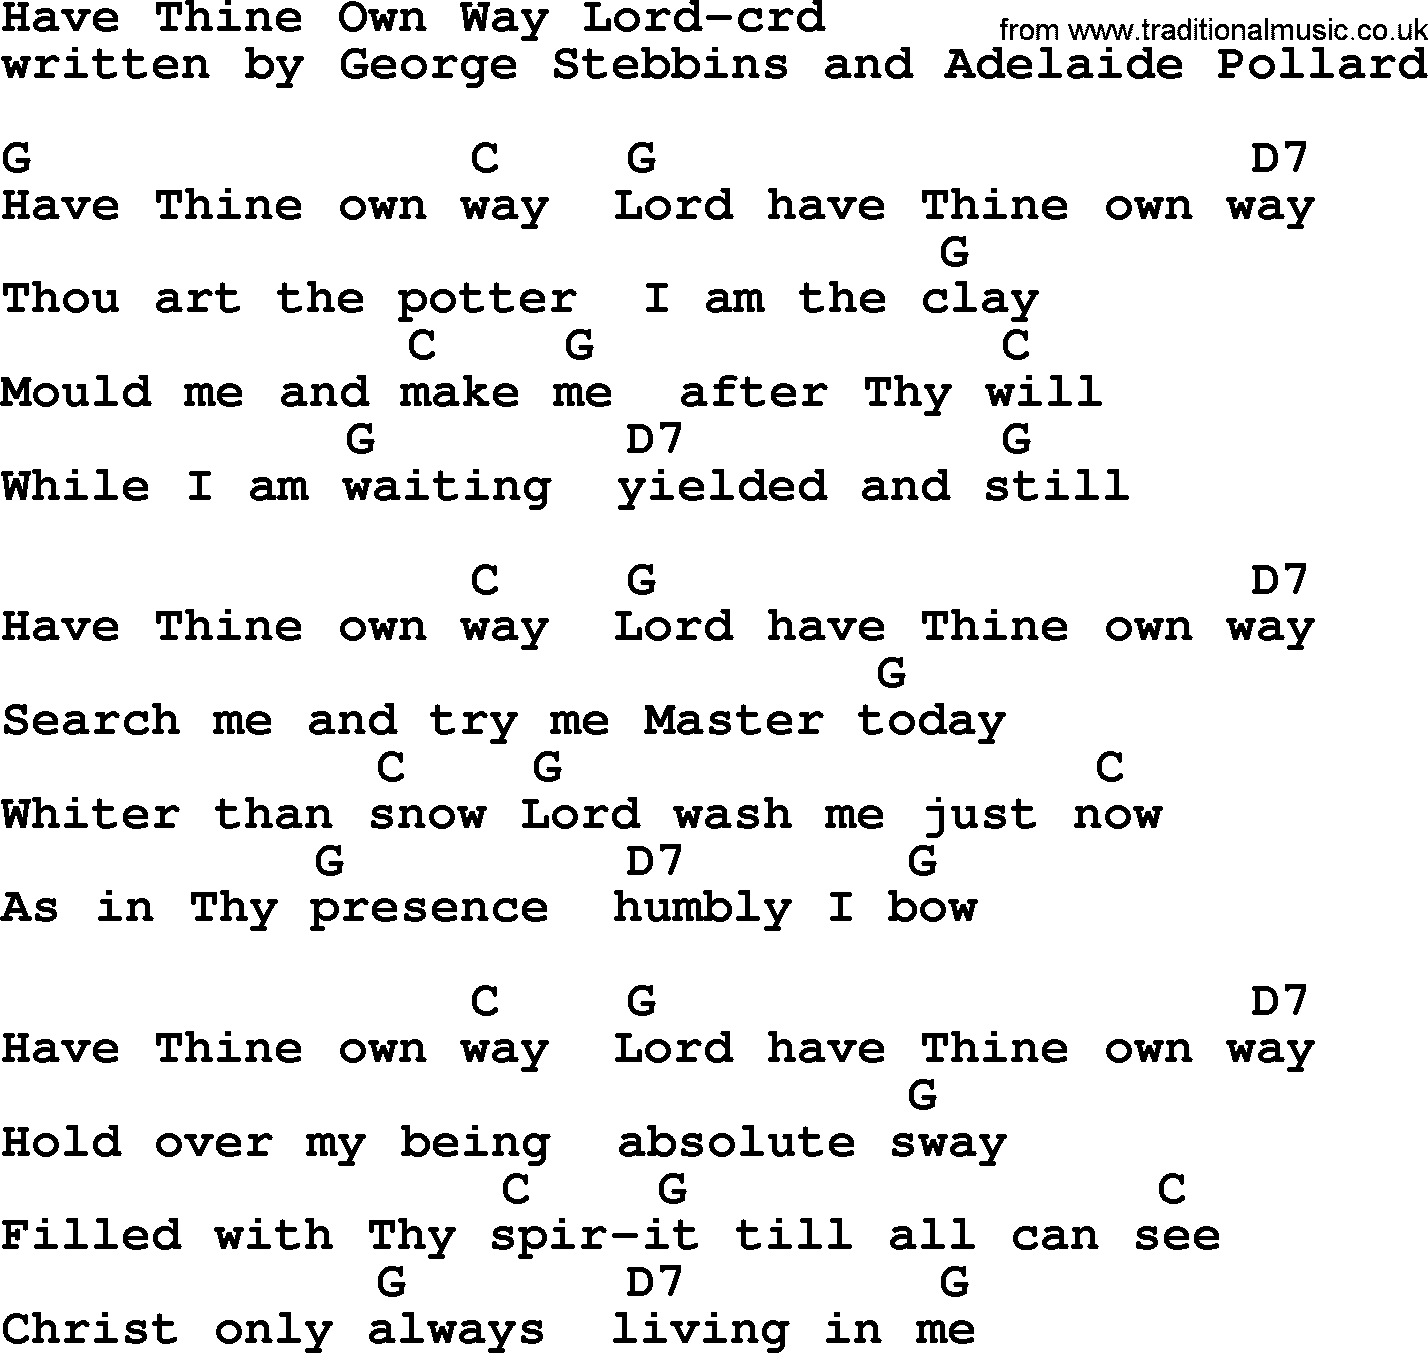 Top 500 Hymn: Have Thine Own Way Lord, lyrics and chords